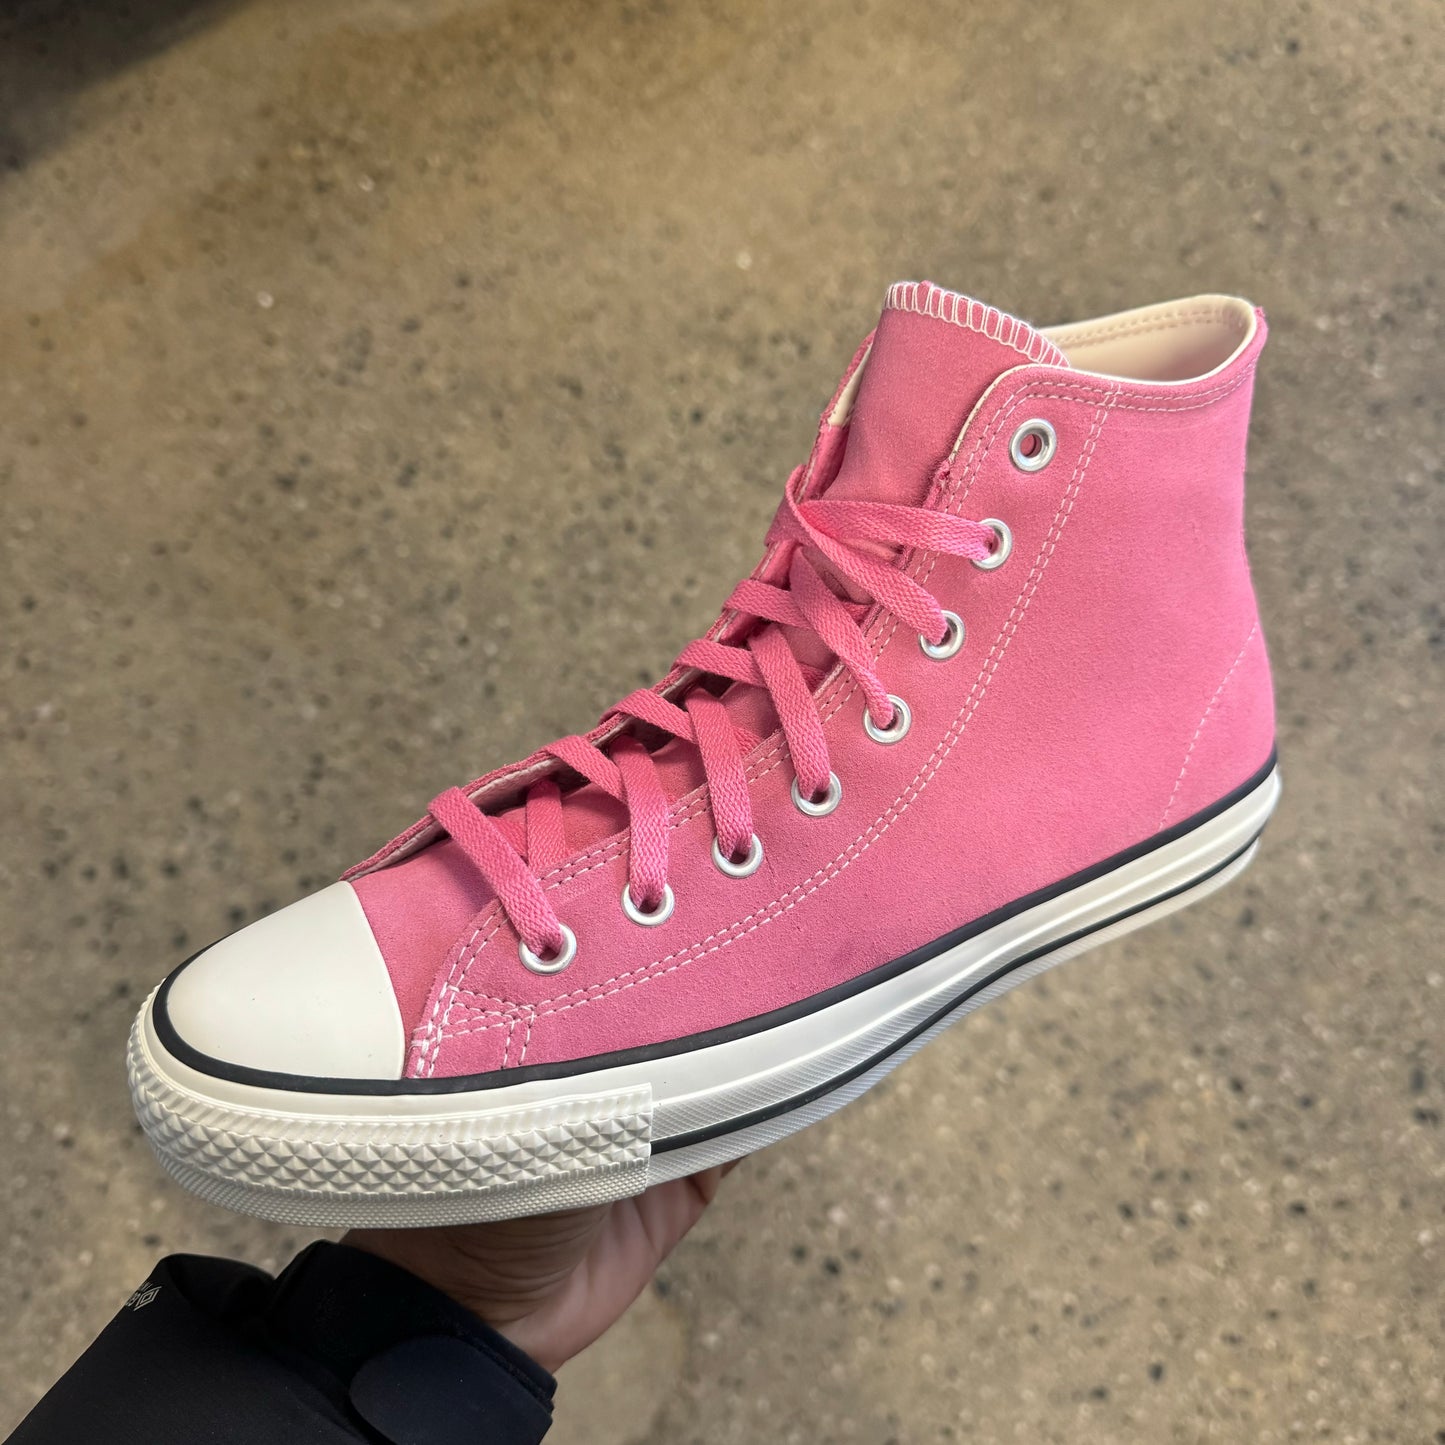 pink hi top sneaker with white sole and toe, side view